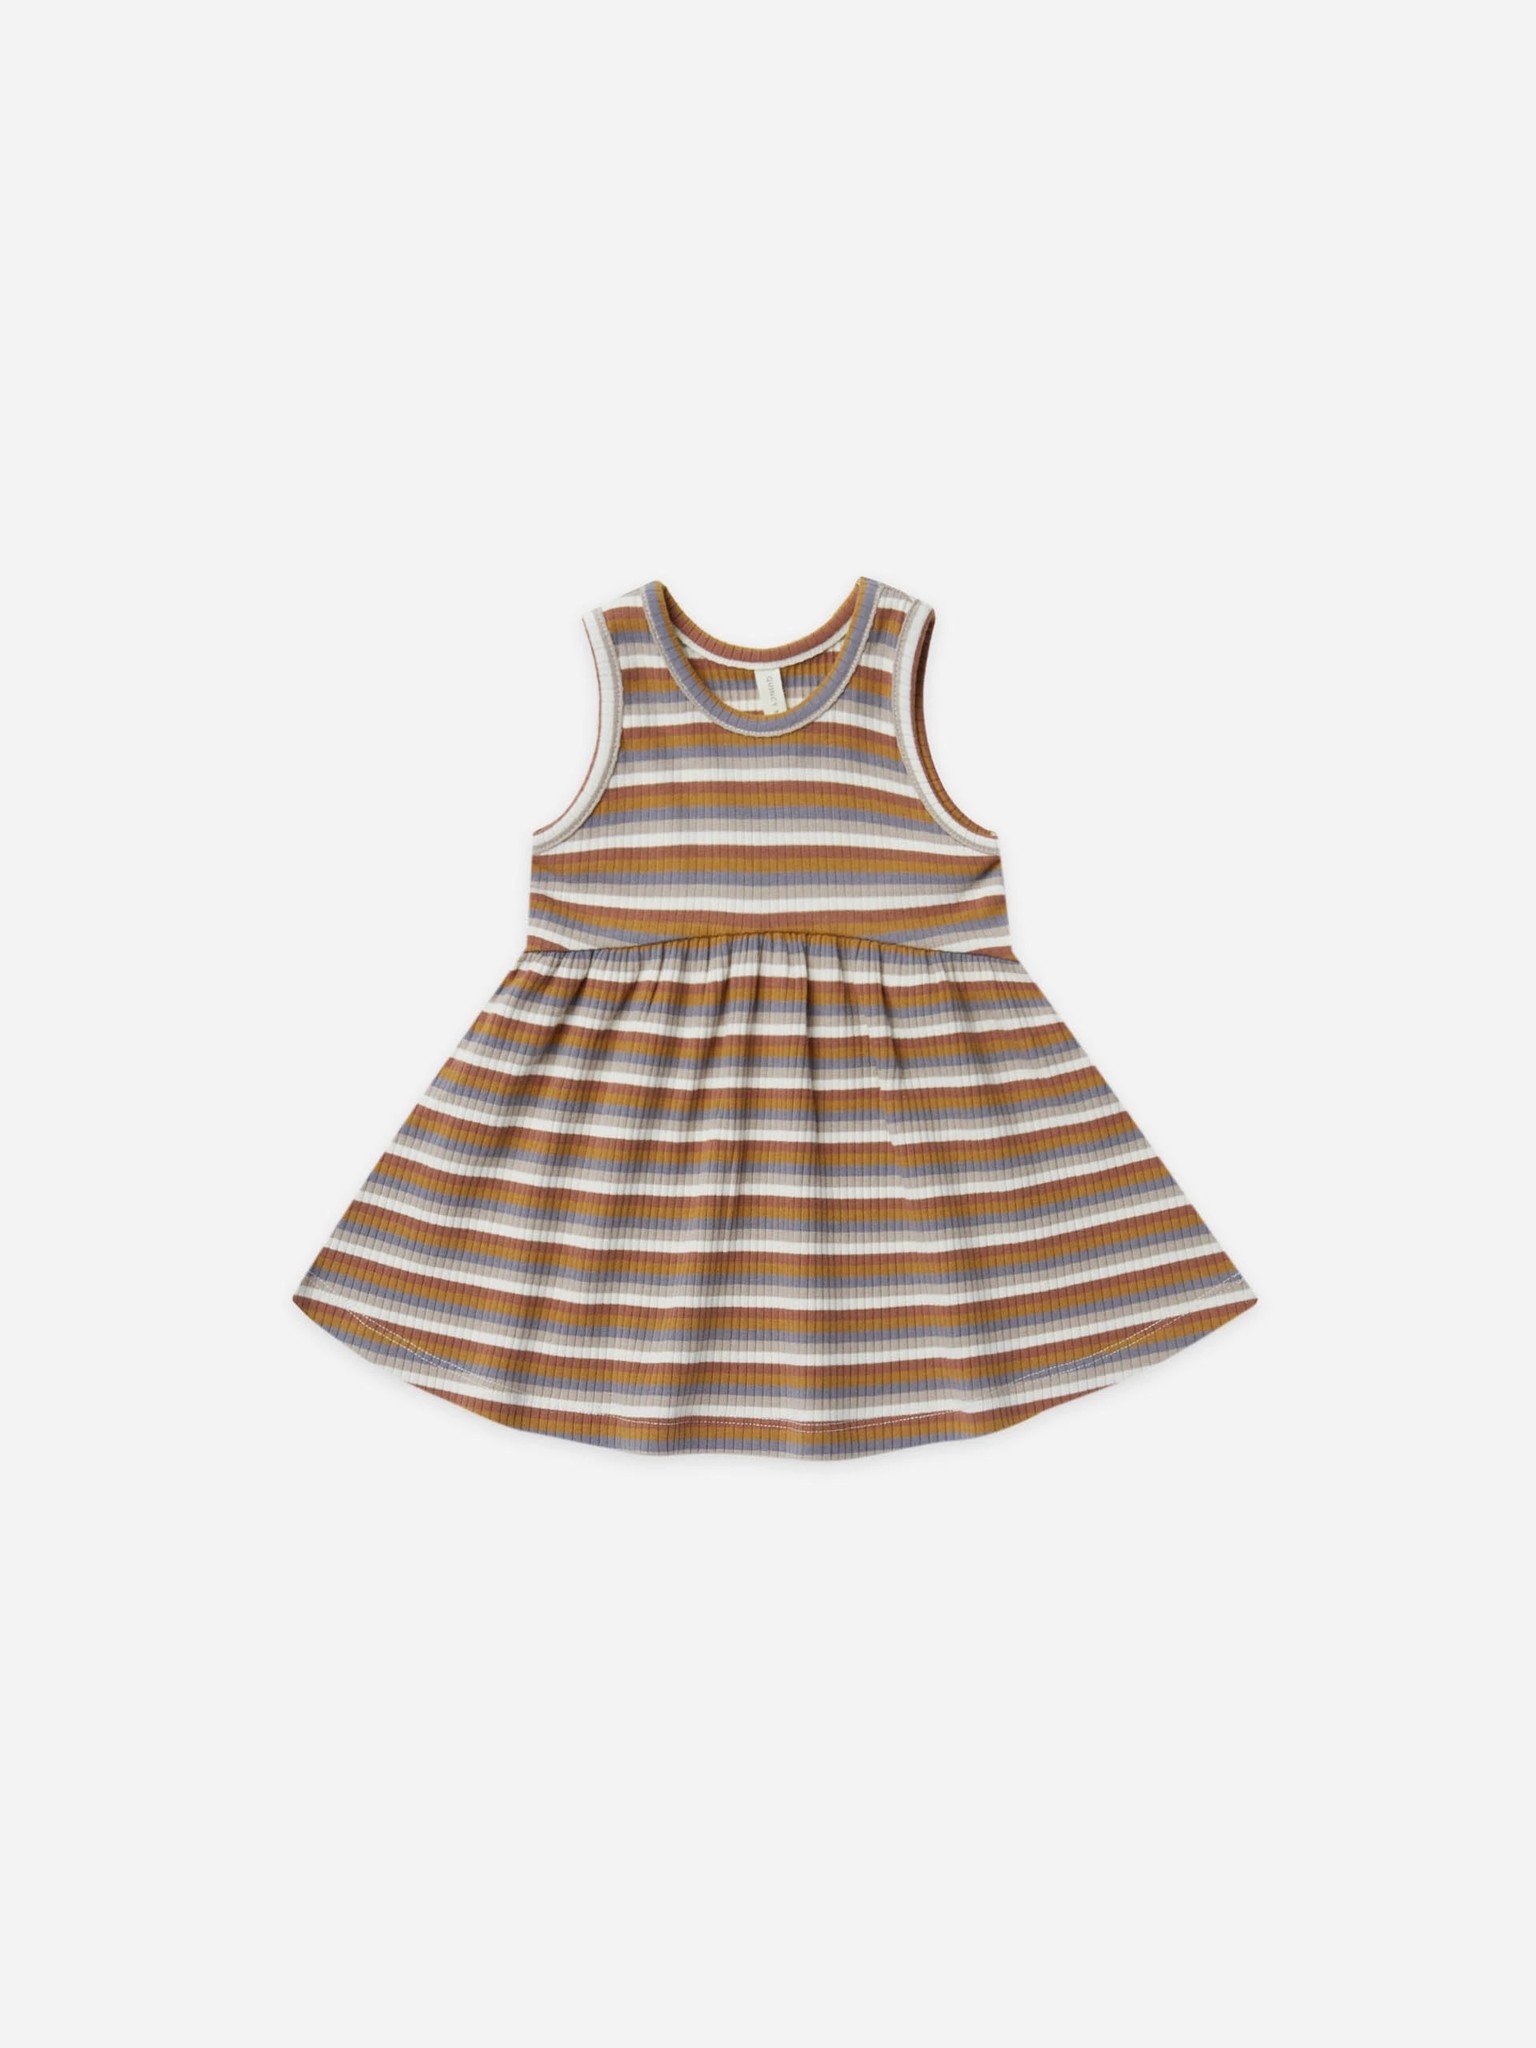 Quincy Mae Quincy Mae Ribbed Tank Dress